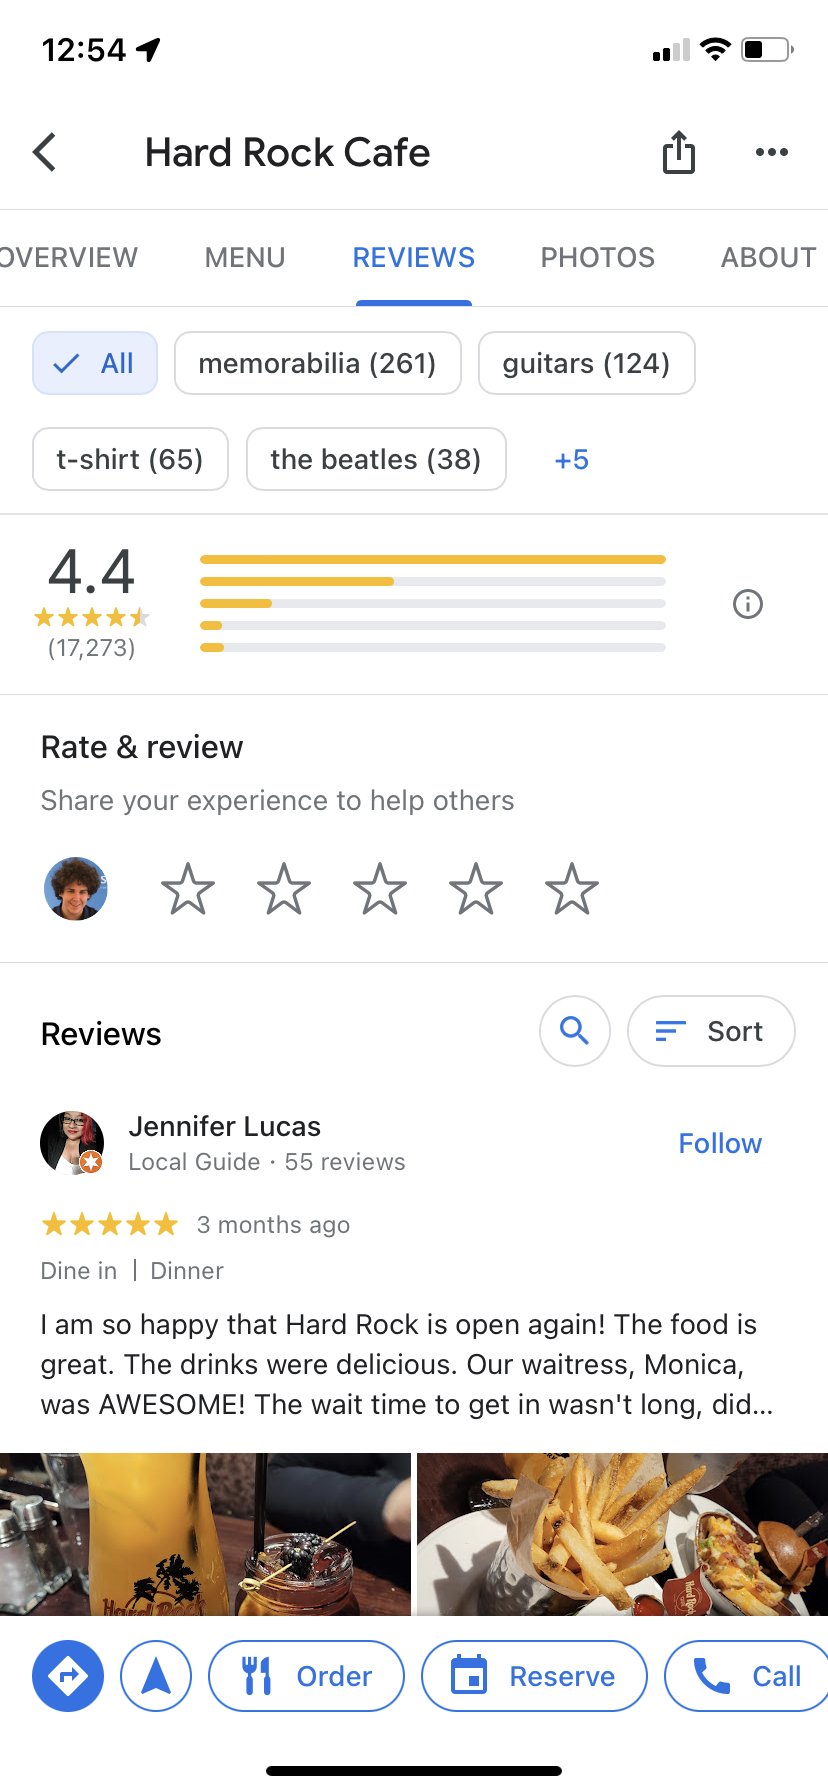 The Google Reviews for Hard Rock Cafe.